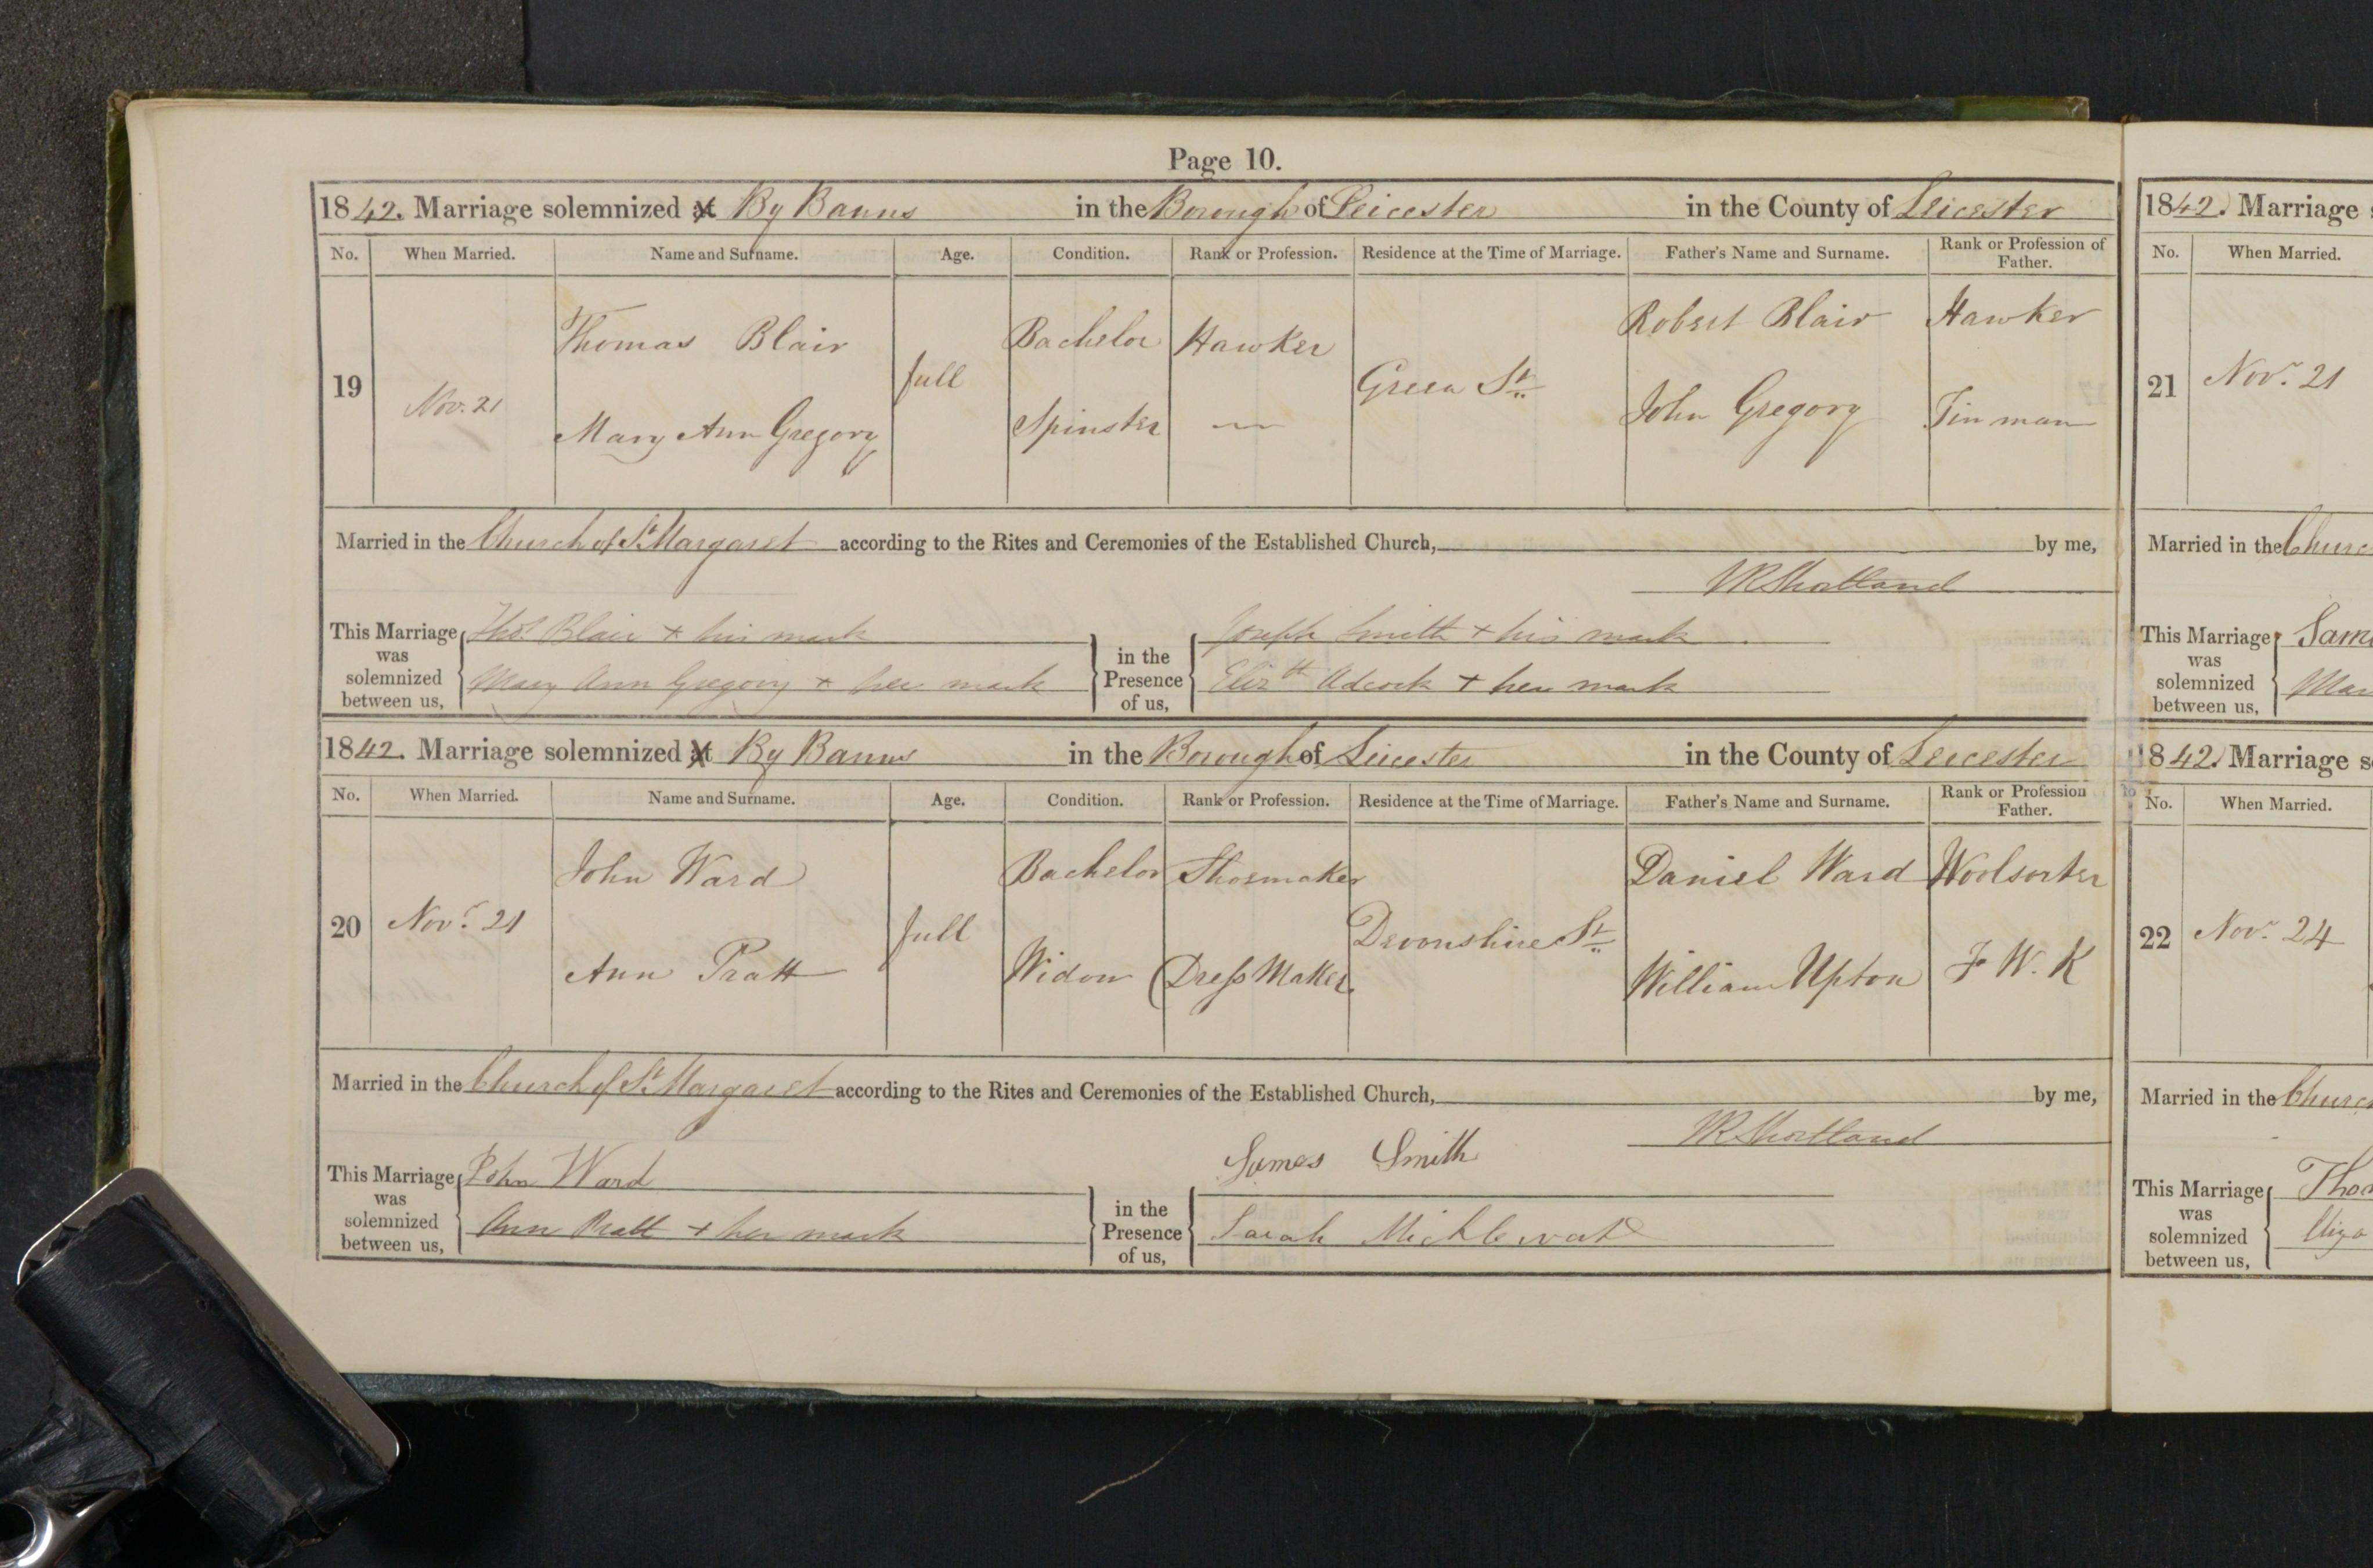 1842 marriage of Mary Ann Gregory to Thomas Blair